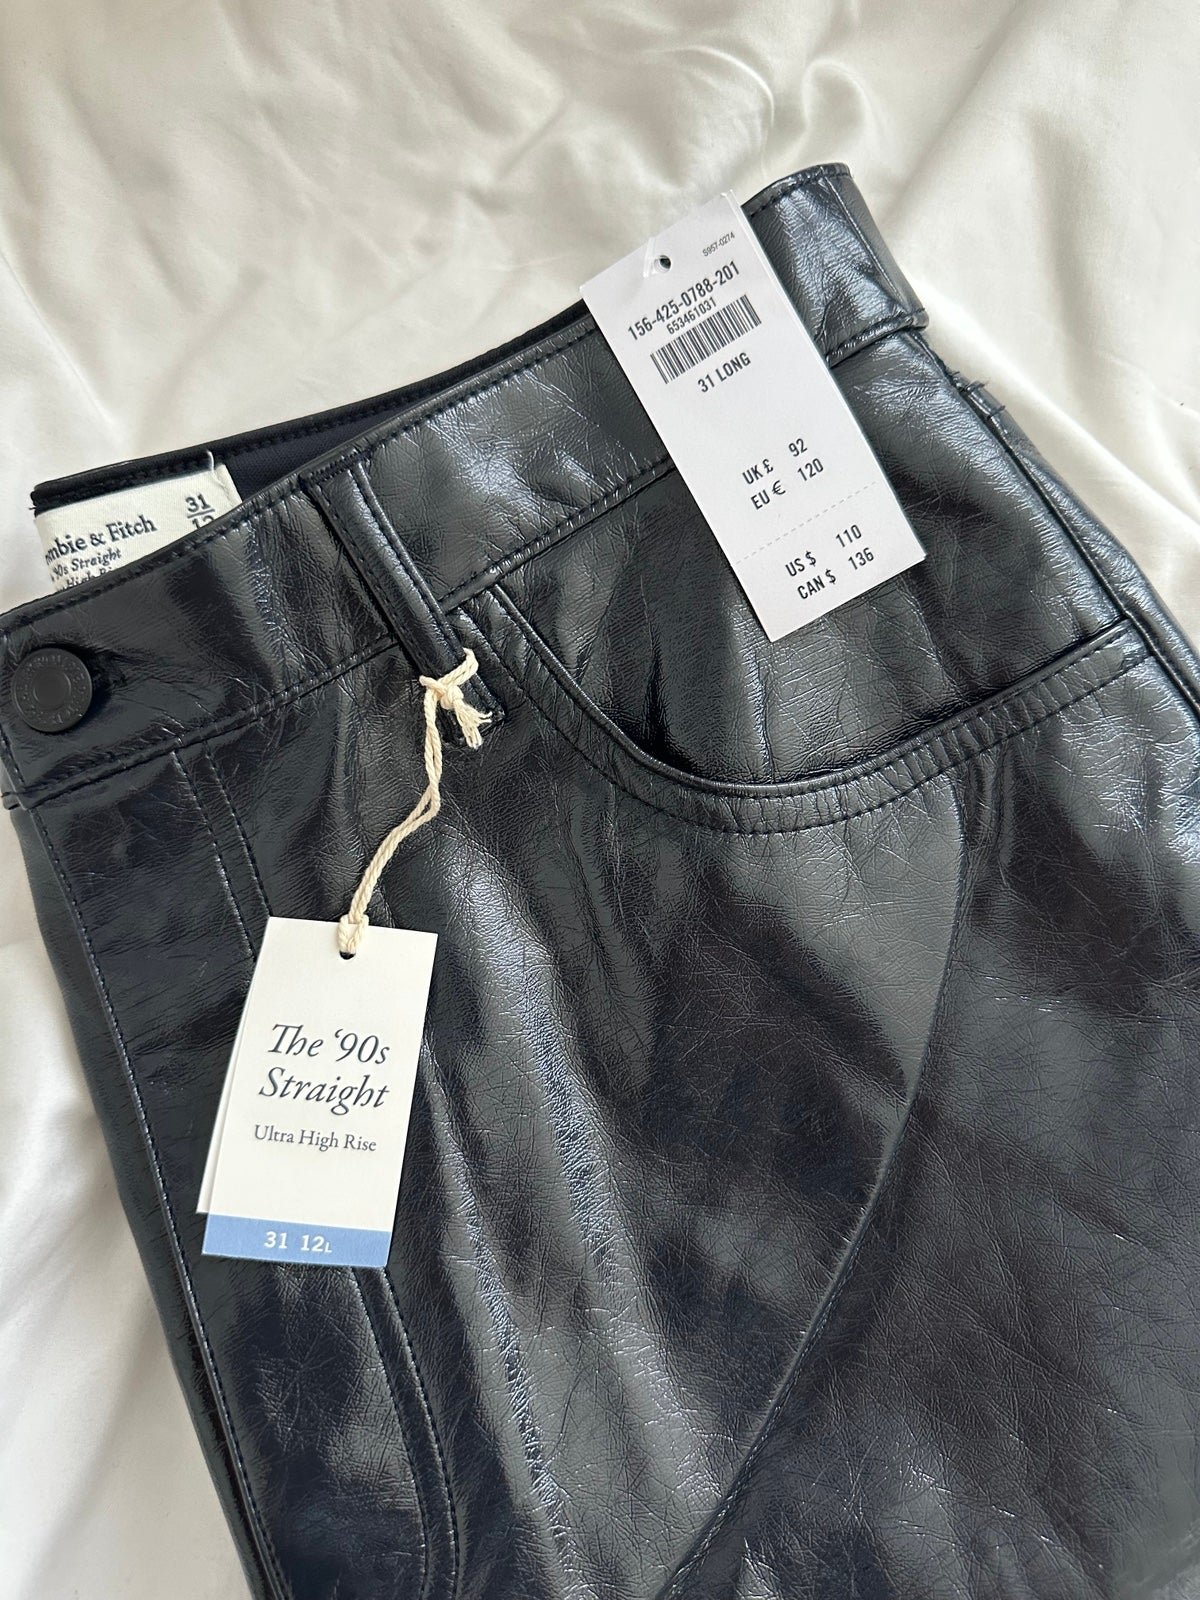 Fashion Abercrombie and Finch leather pants m8KGQMRa7 just buy it